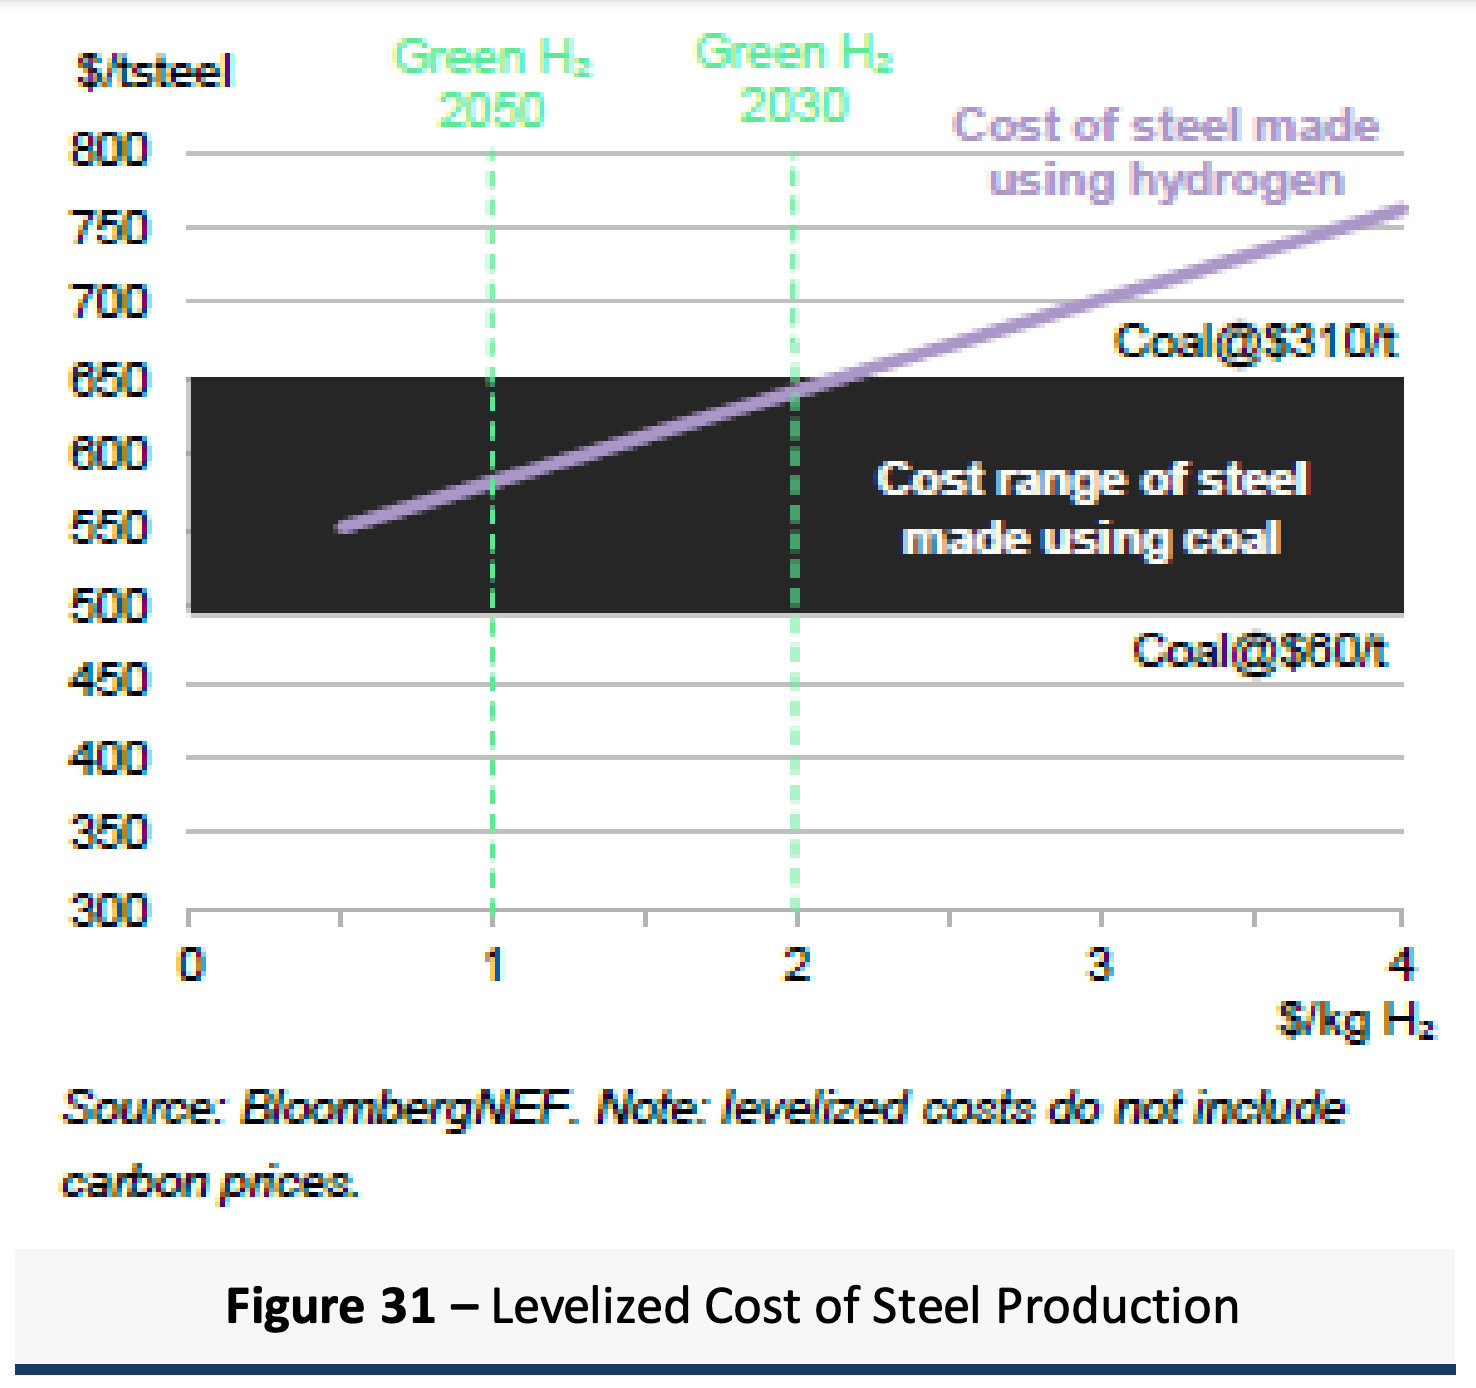 Levelized cost of steel with hydrogen vs coal from Canada's hydrogen strategy